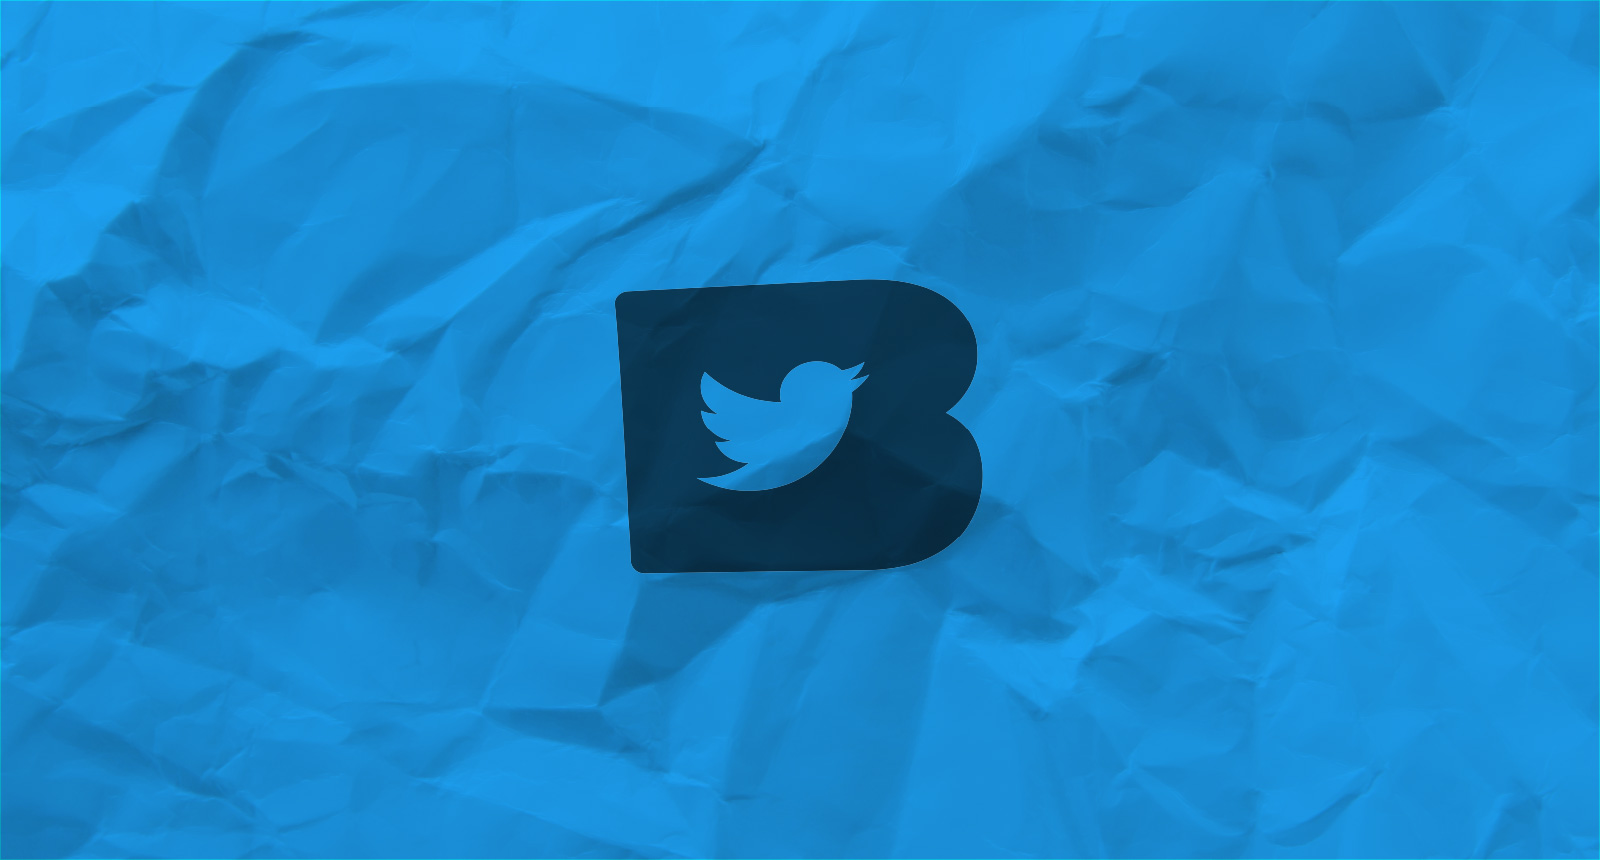 Twitter Blue logo on crumpled paper